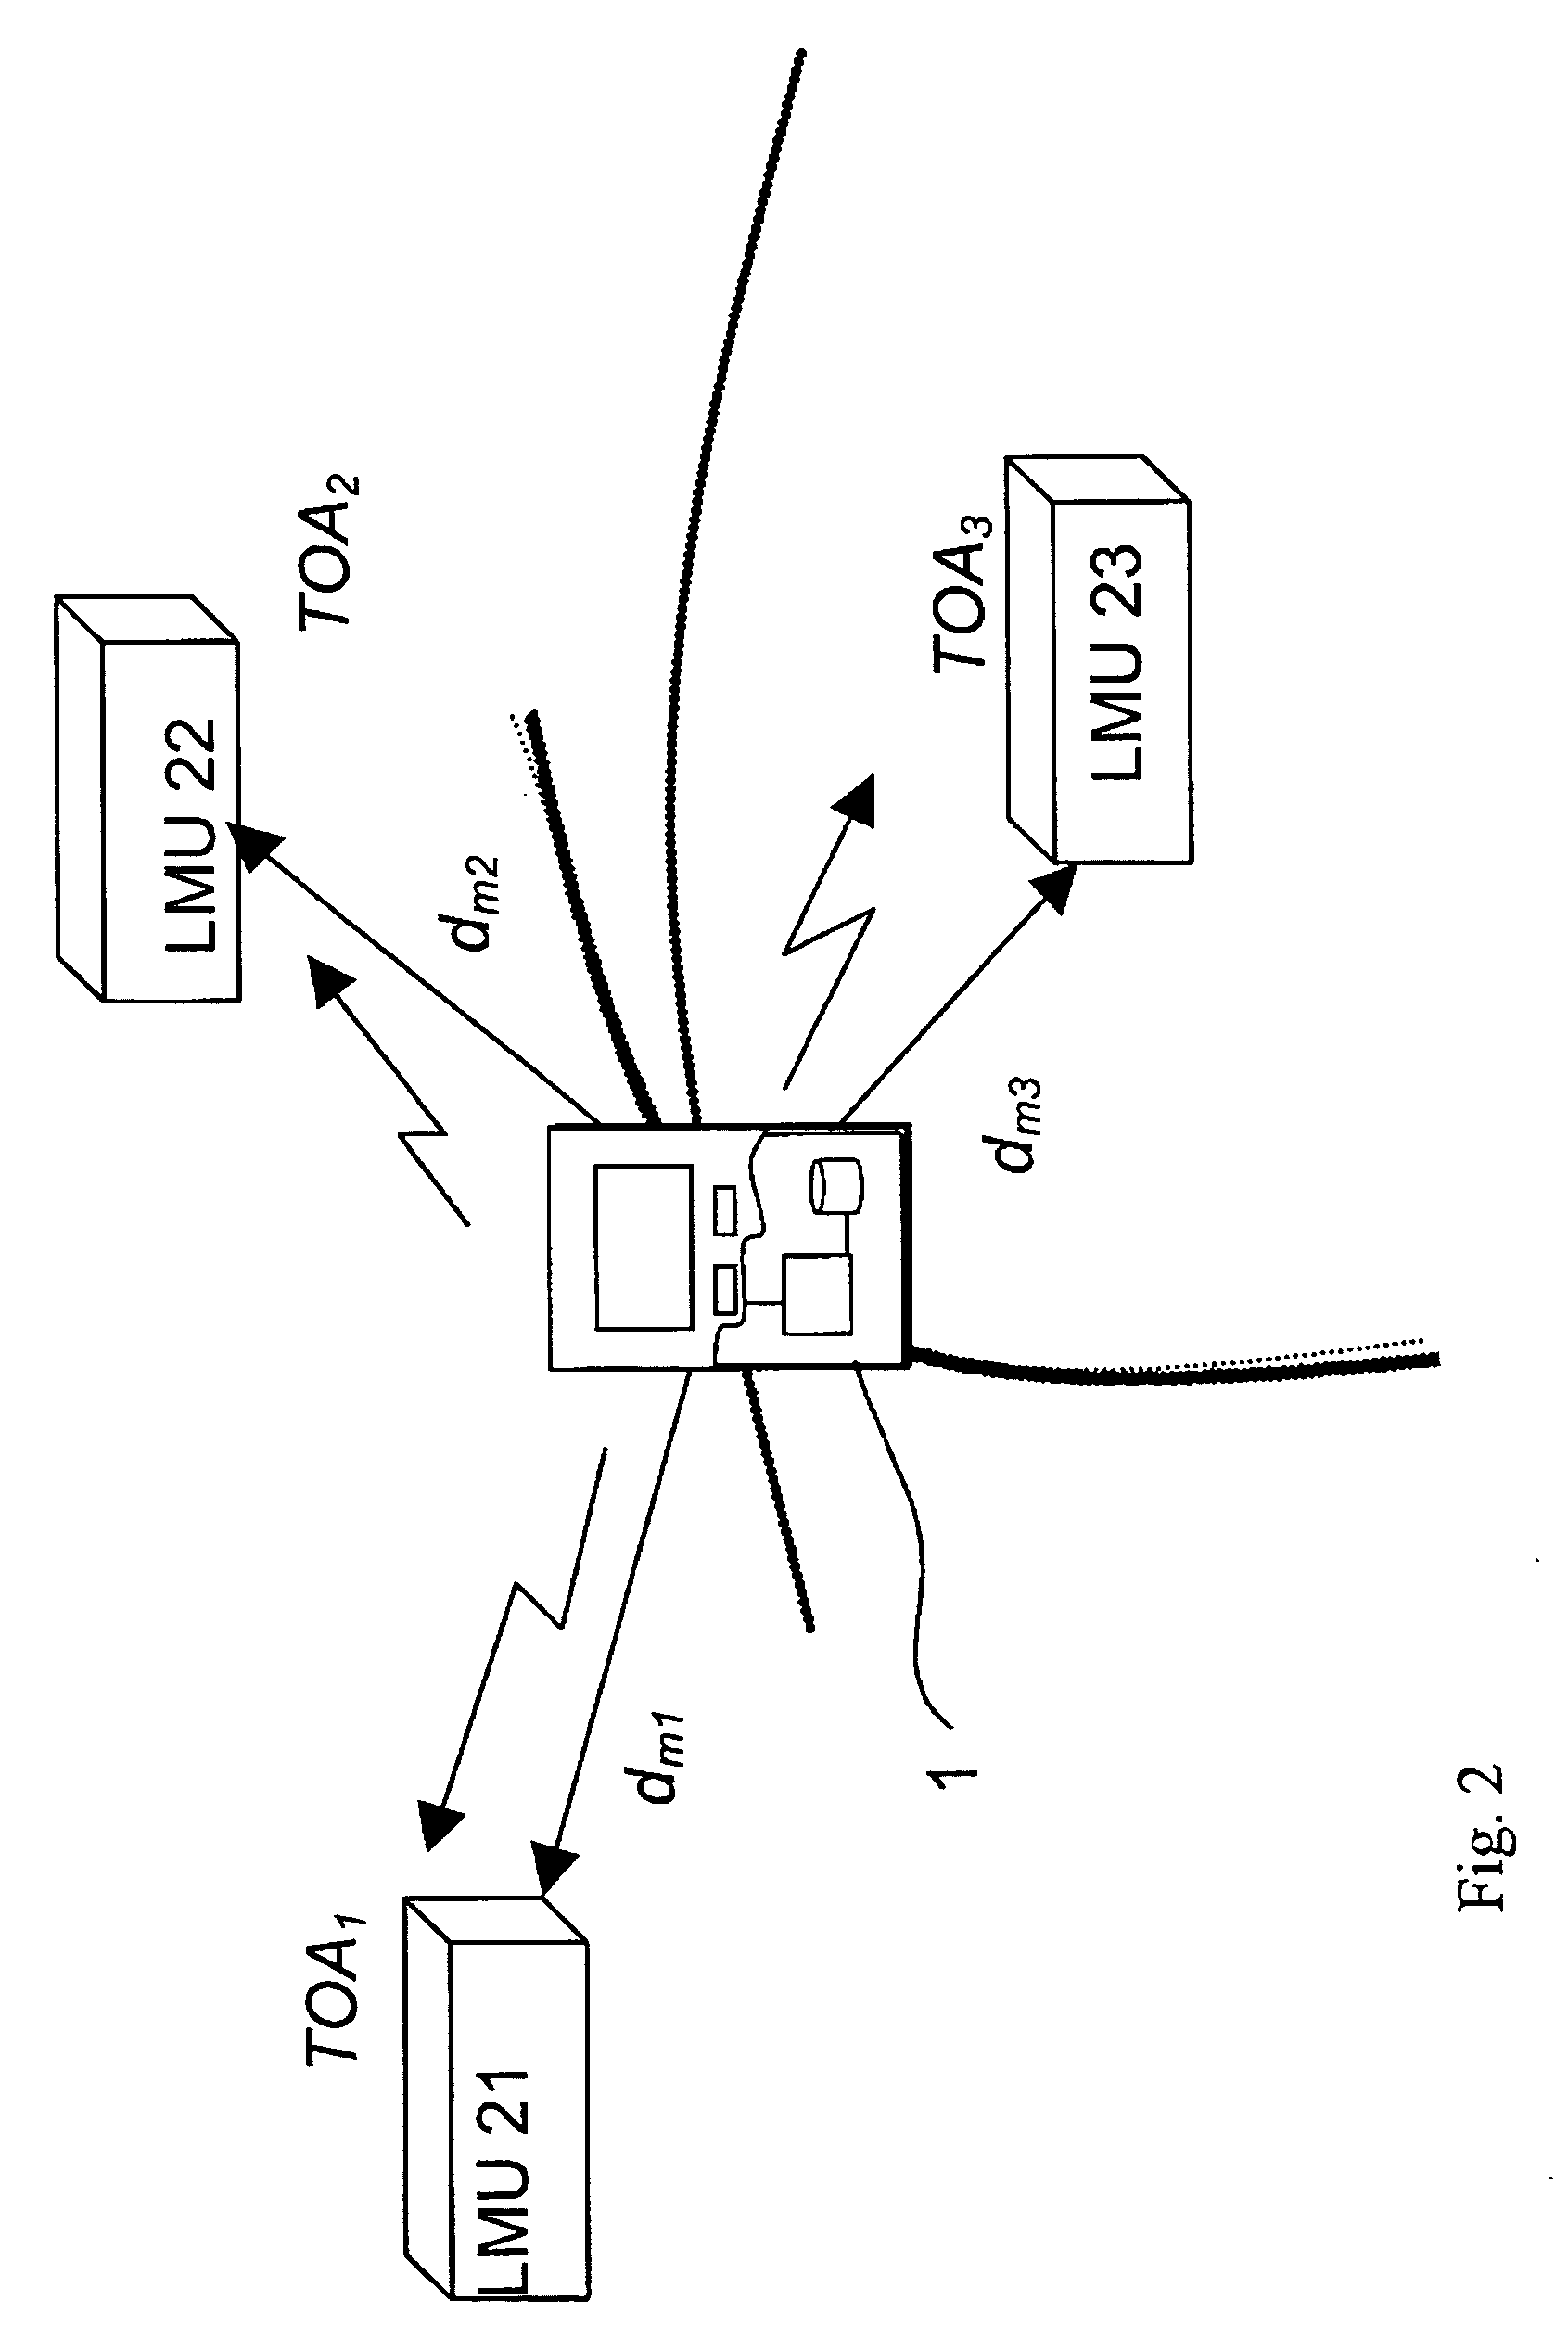 Location services in a communications system